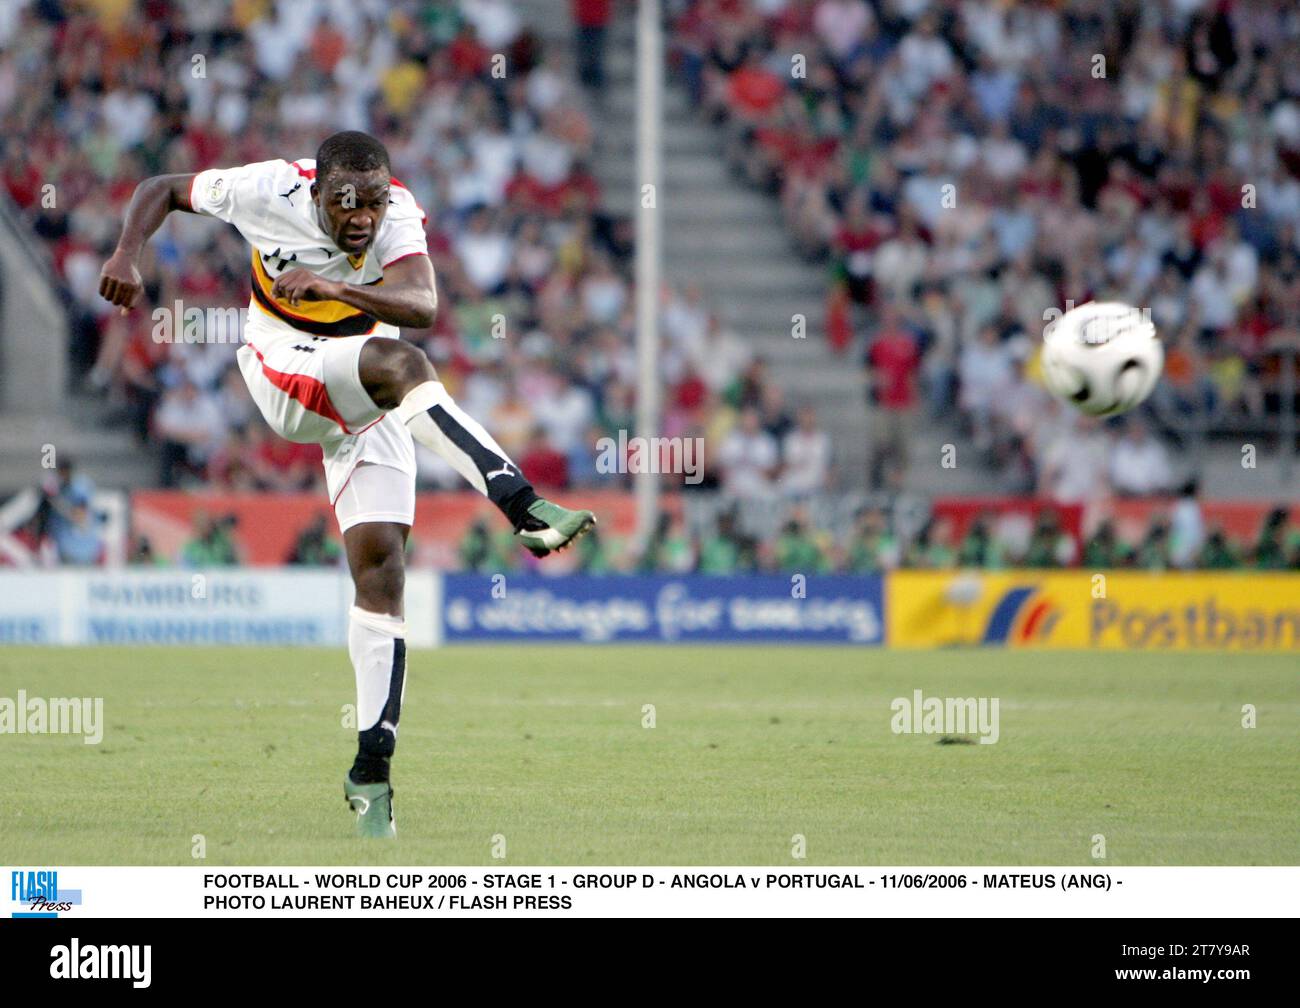 FOOTBALL - WORLD CUP 2006 - STAGE 1 - GROUP D - ANGOLA v PORTUGAL - 11/06/2006 - MATEUS (ANG) - PHOTO LAURENT BAHEUX / FLASH PRESS Stock Photo